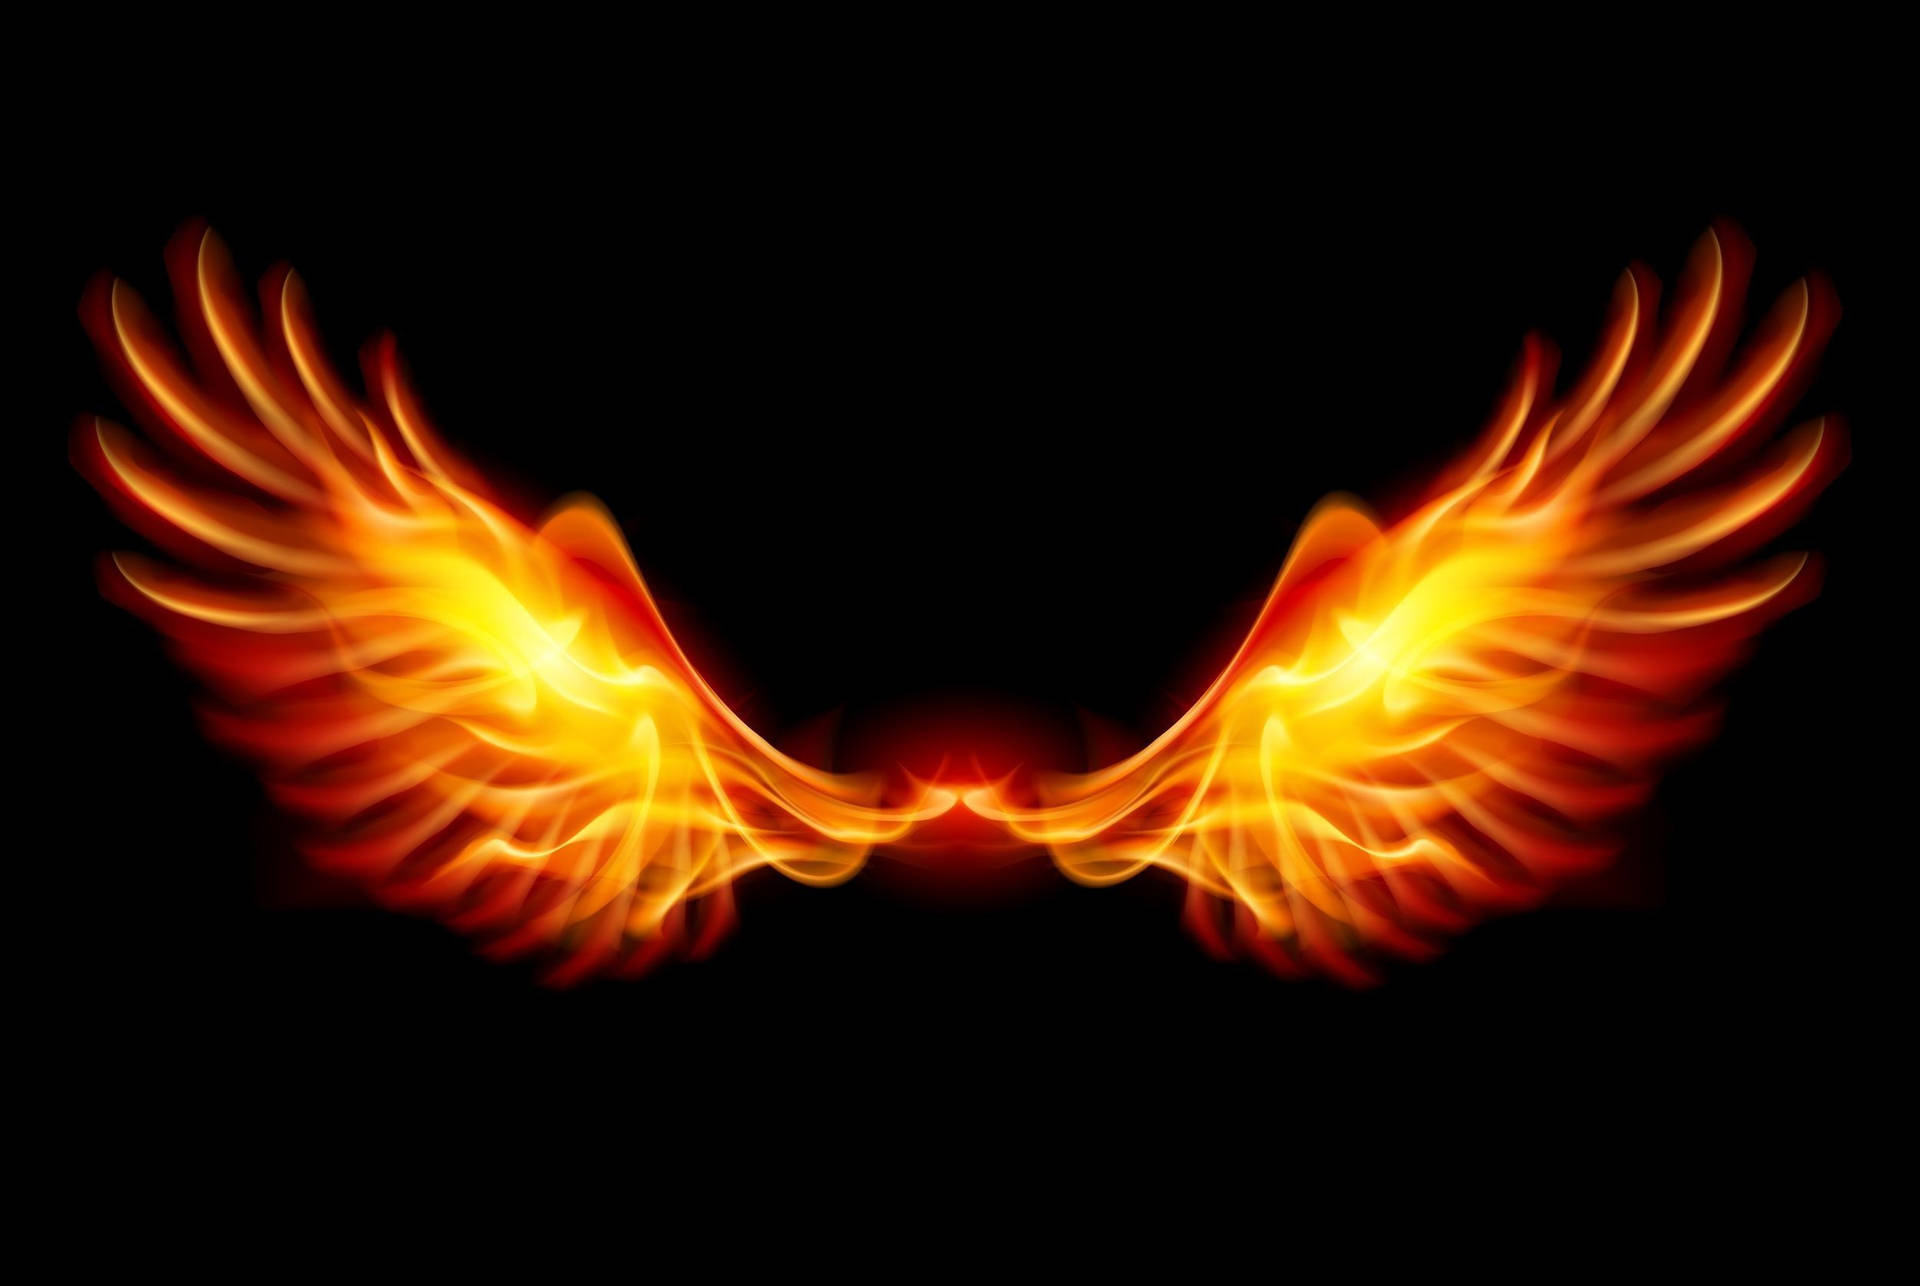 A Bright Flaming Phoenix Rising from the Ashes Wallpaper